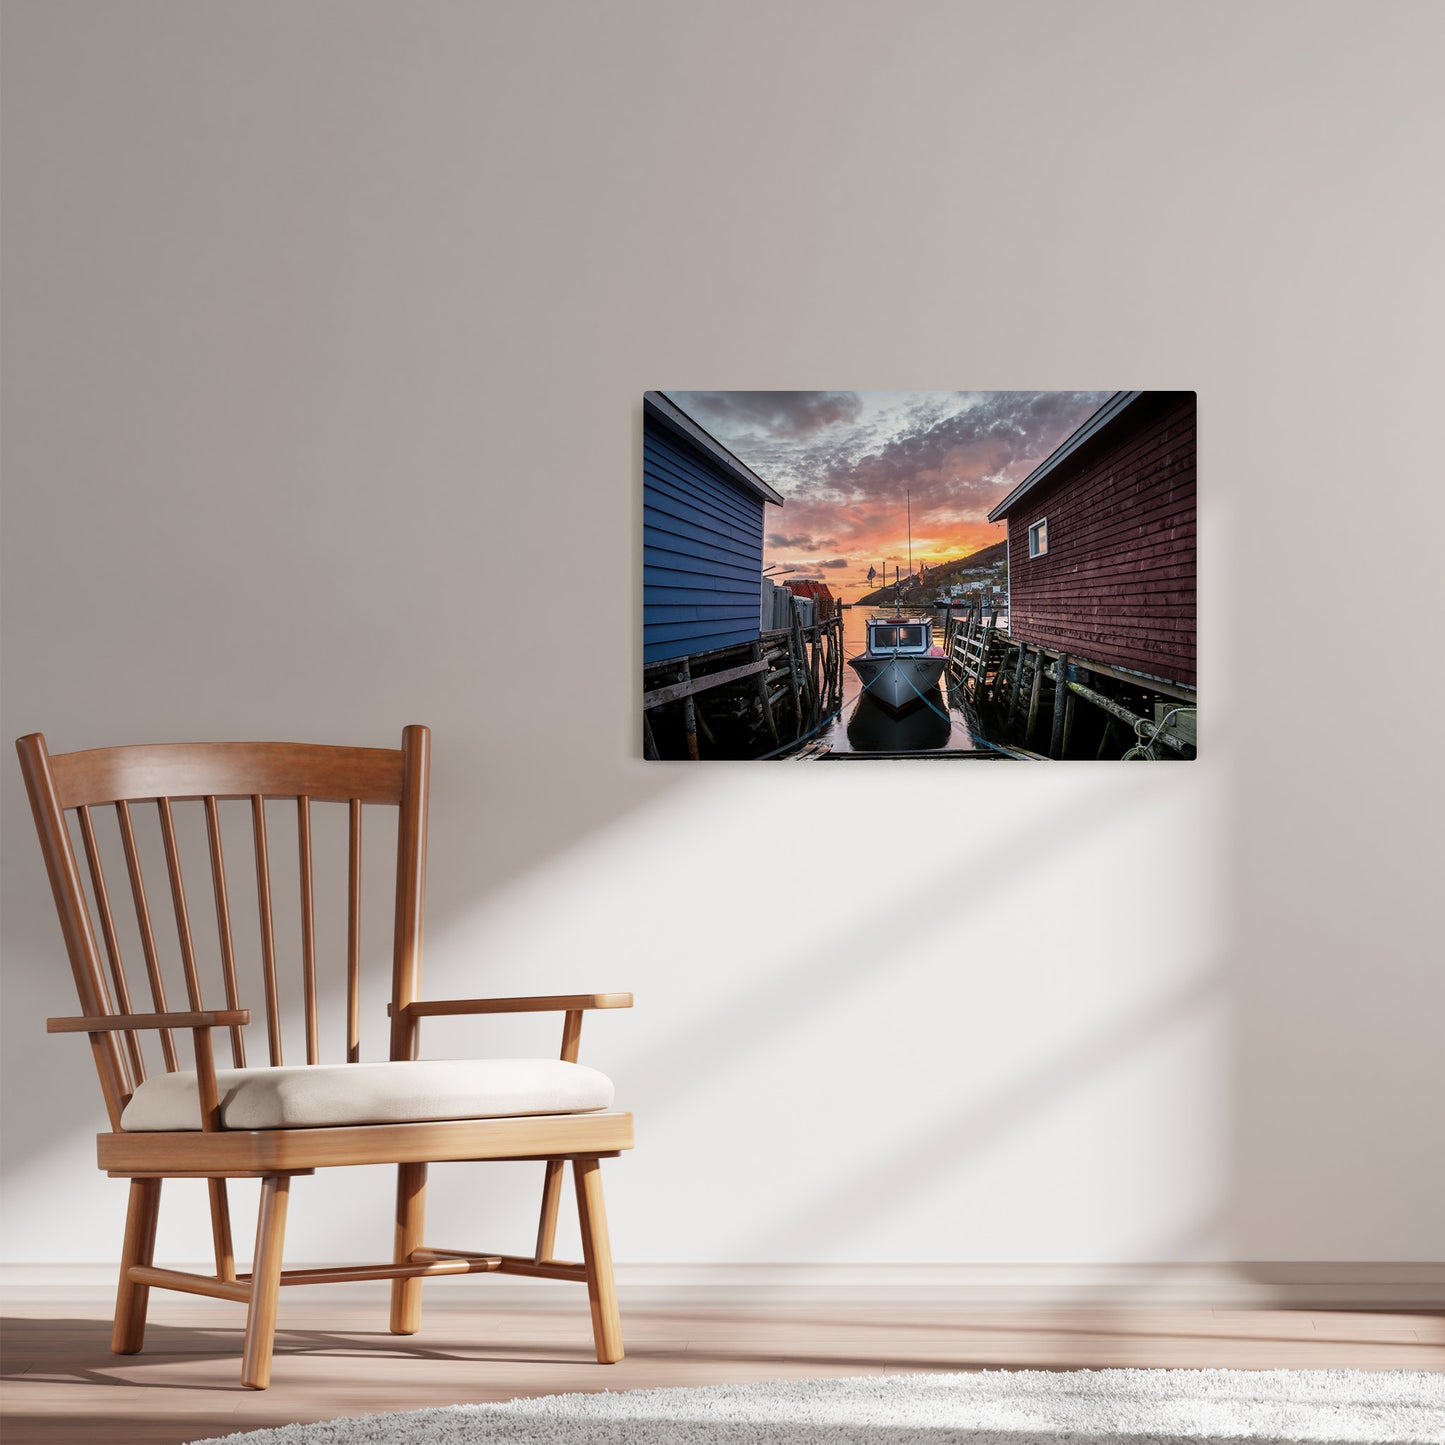 Ray Mackey's Petty Harbour Stages photography reproduced on HD metal print and displayed on wall